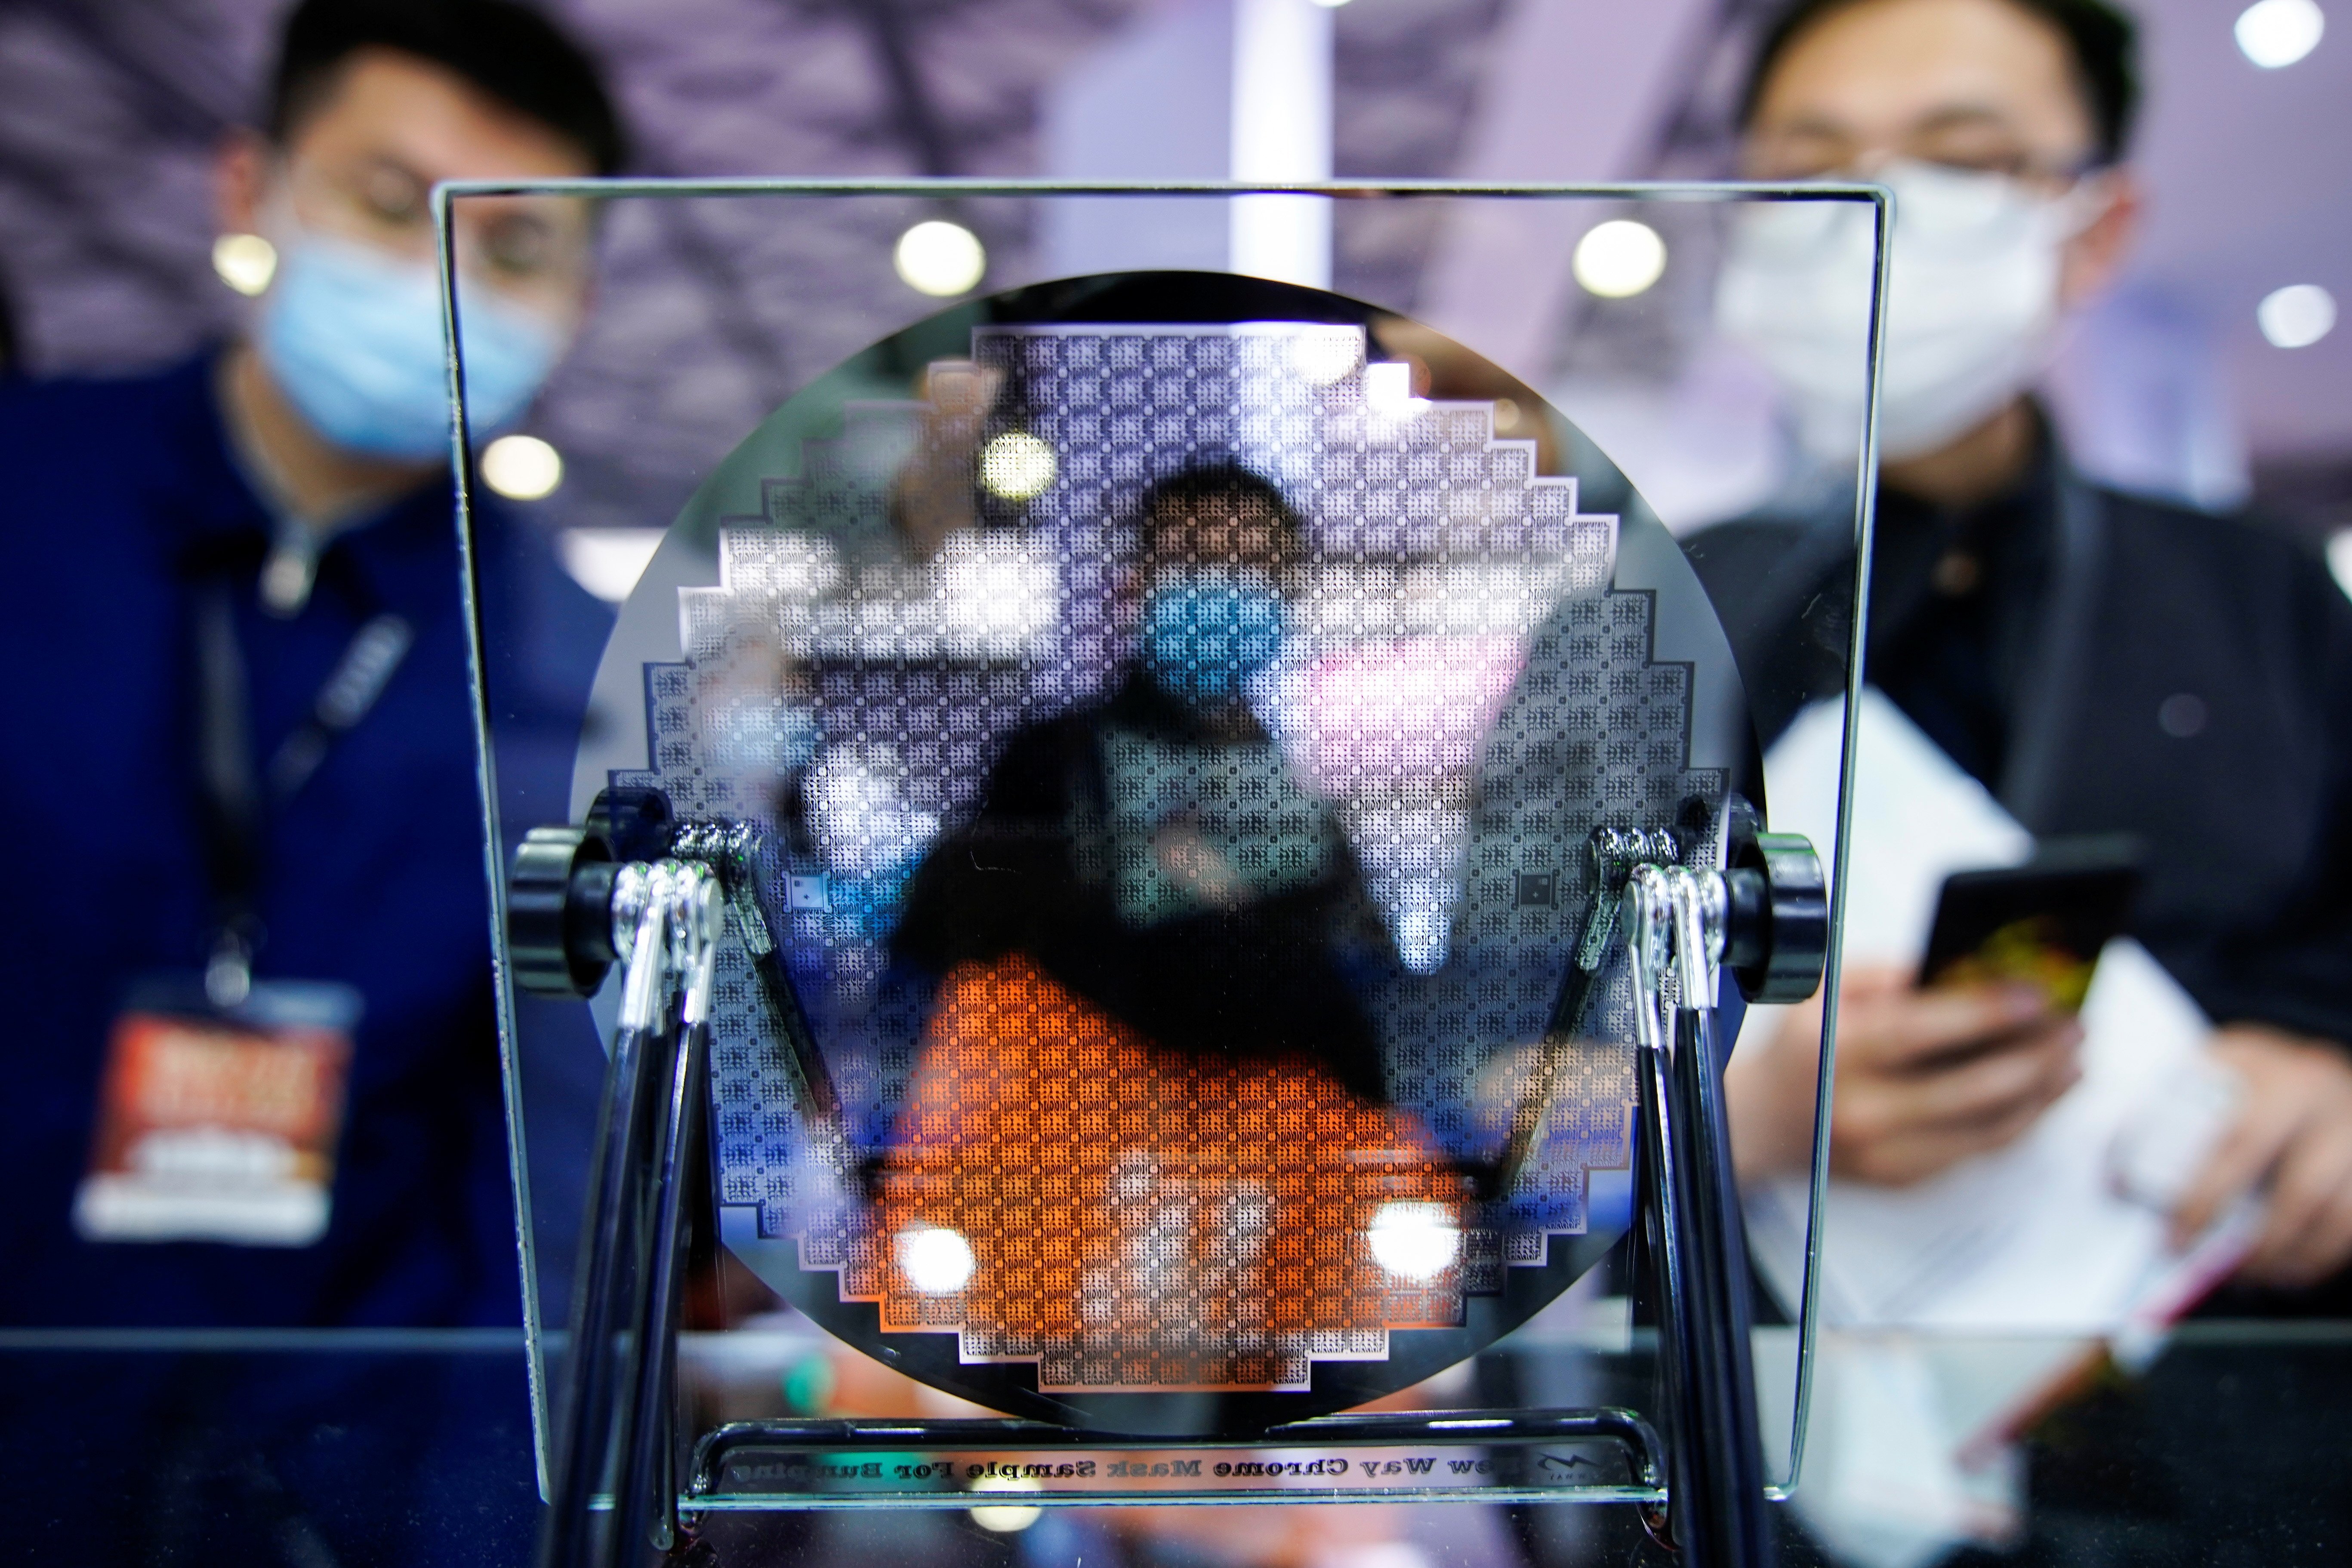 Visitors look at a display of a semiconductor device at Semicon China, a trade fair for semiconductor technology, in Shanghai, China March 17, 2021. REUTERS/Aly Song